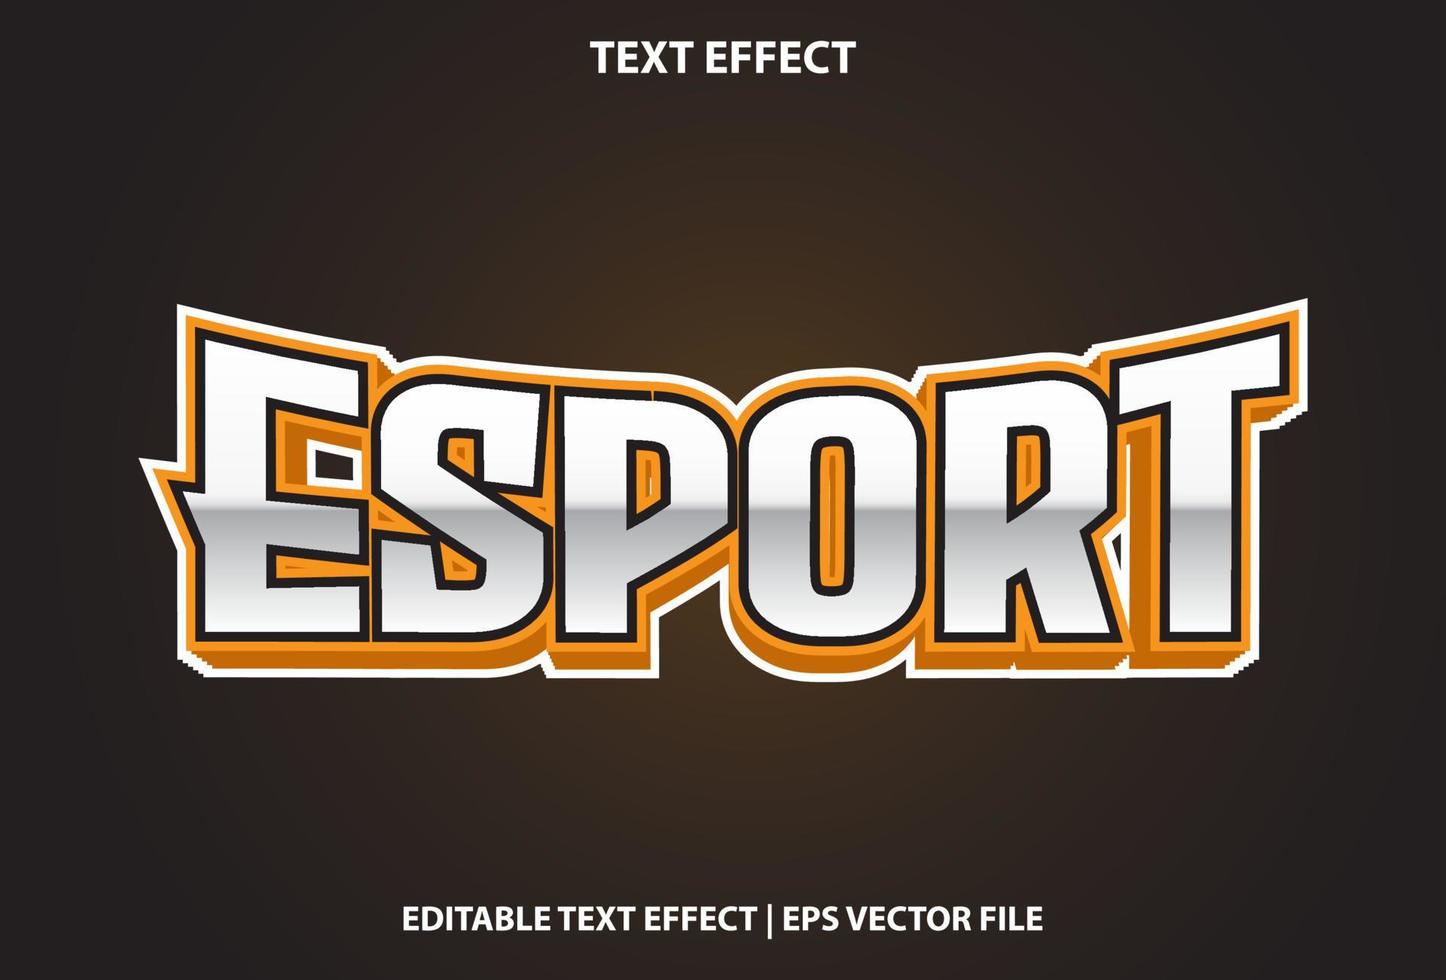 e sport text effect with orange gradient for promotion. vector